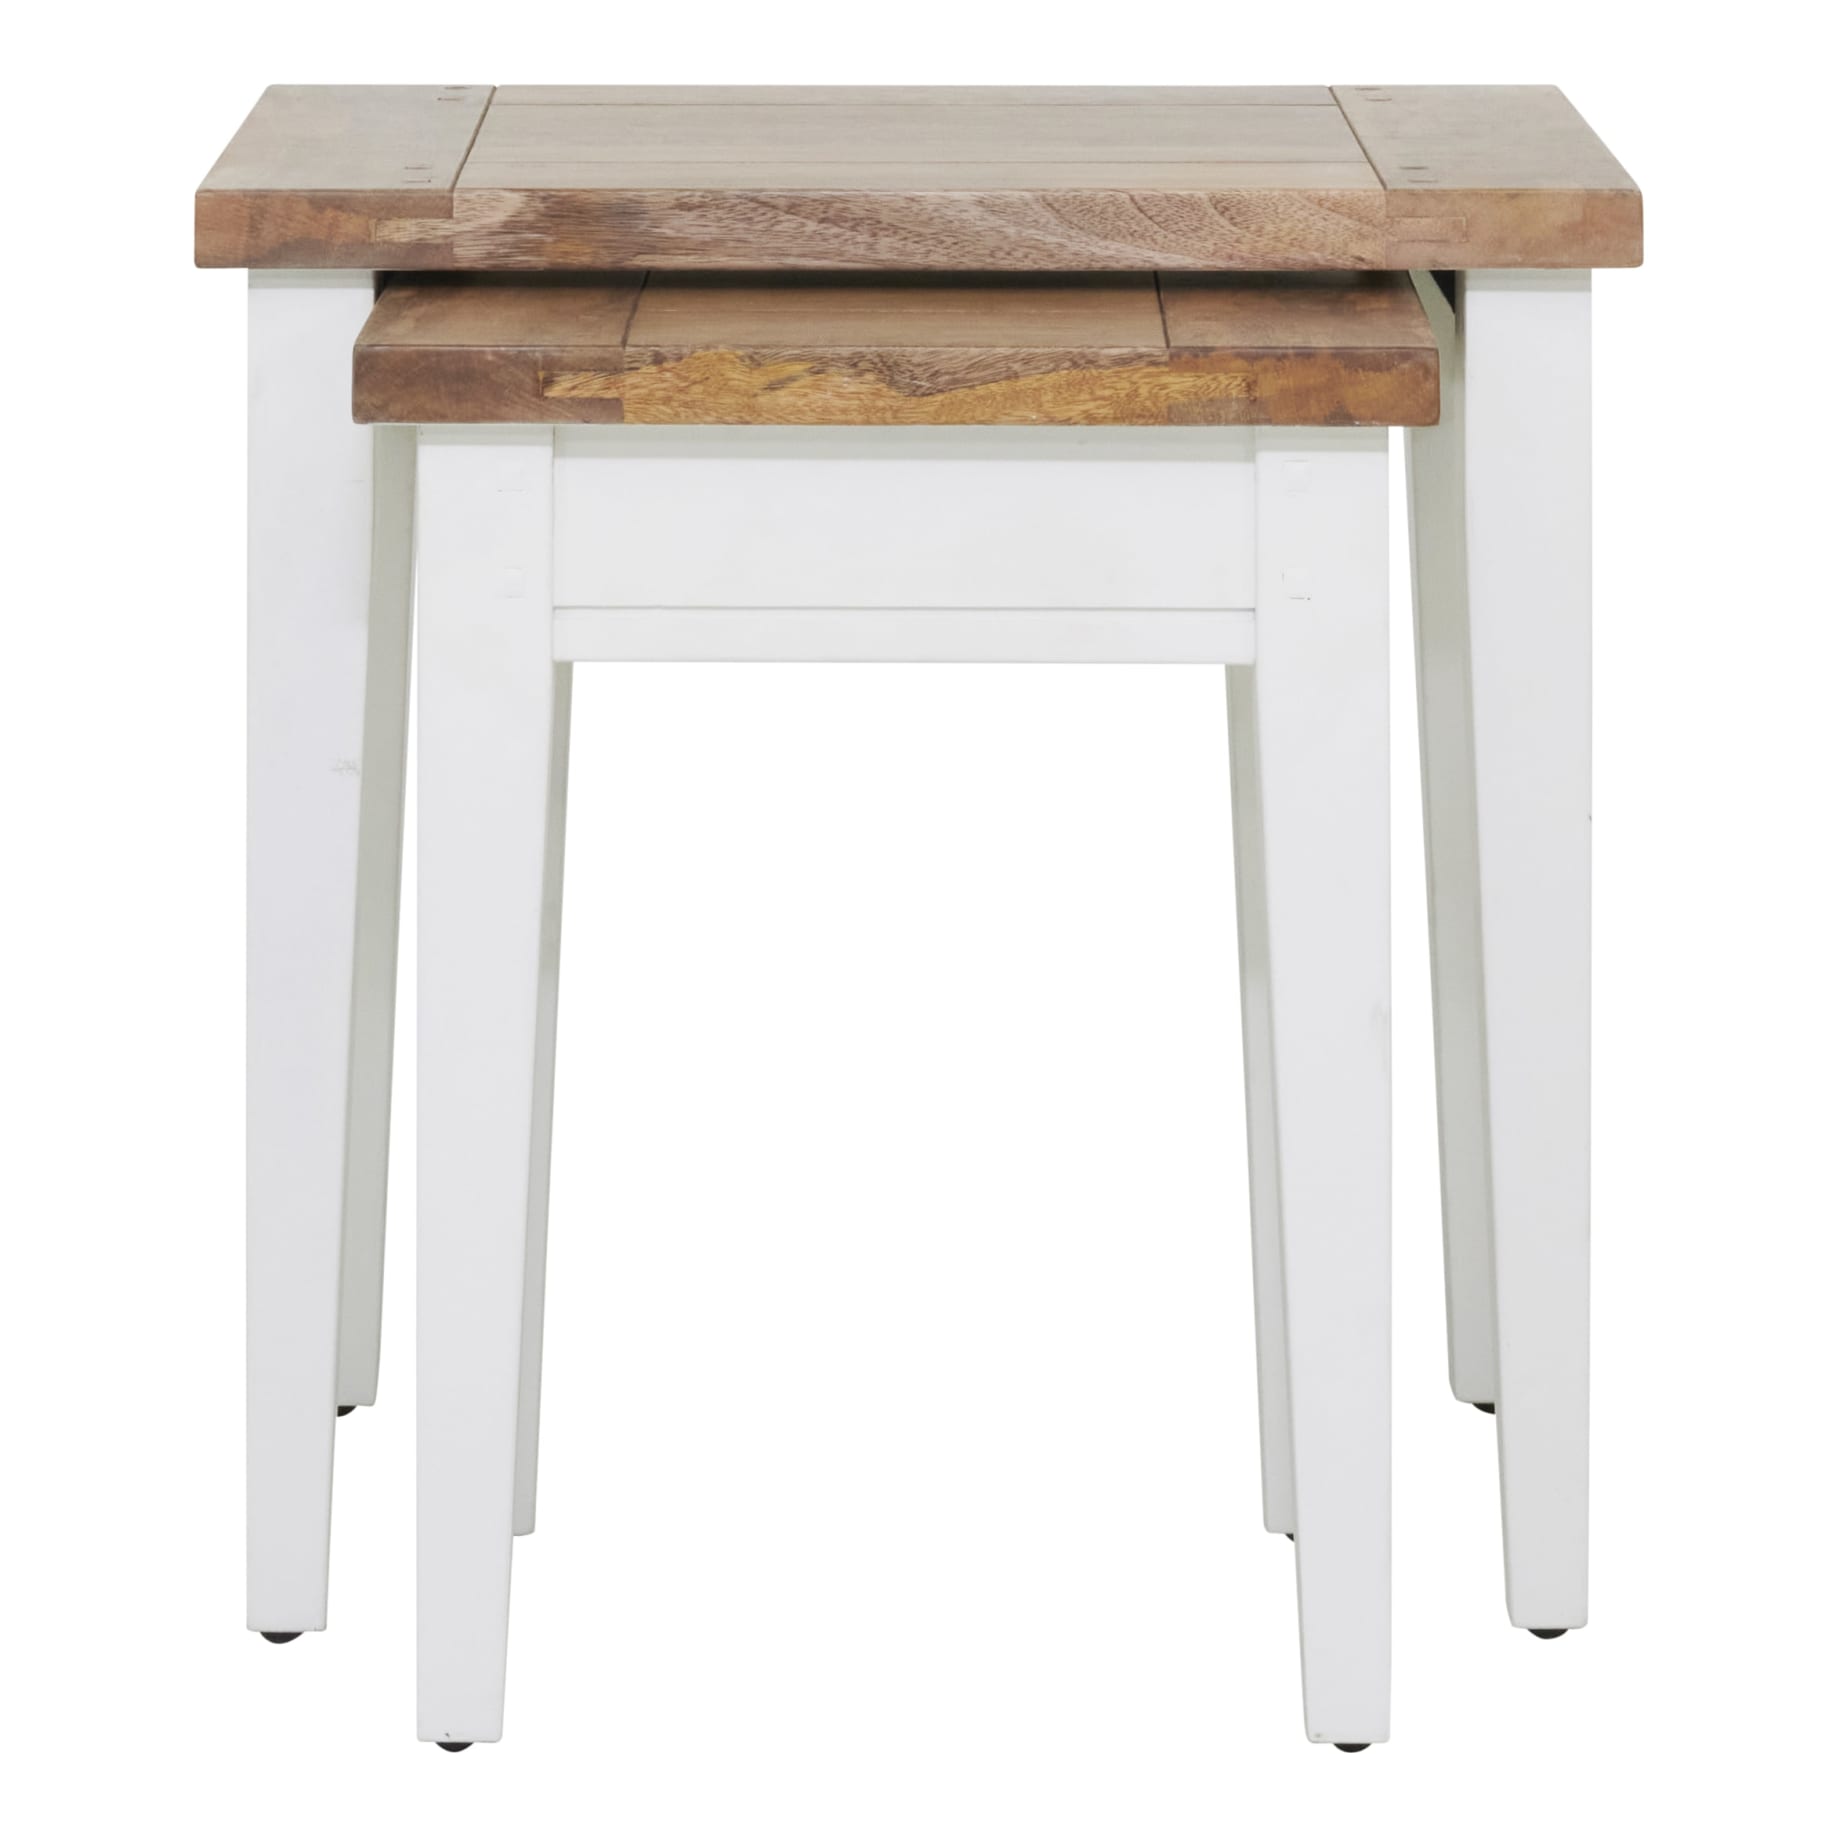 Mango Creek Nest of Tables in White/Clear Lacquer